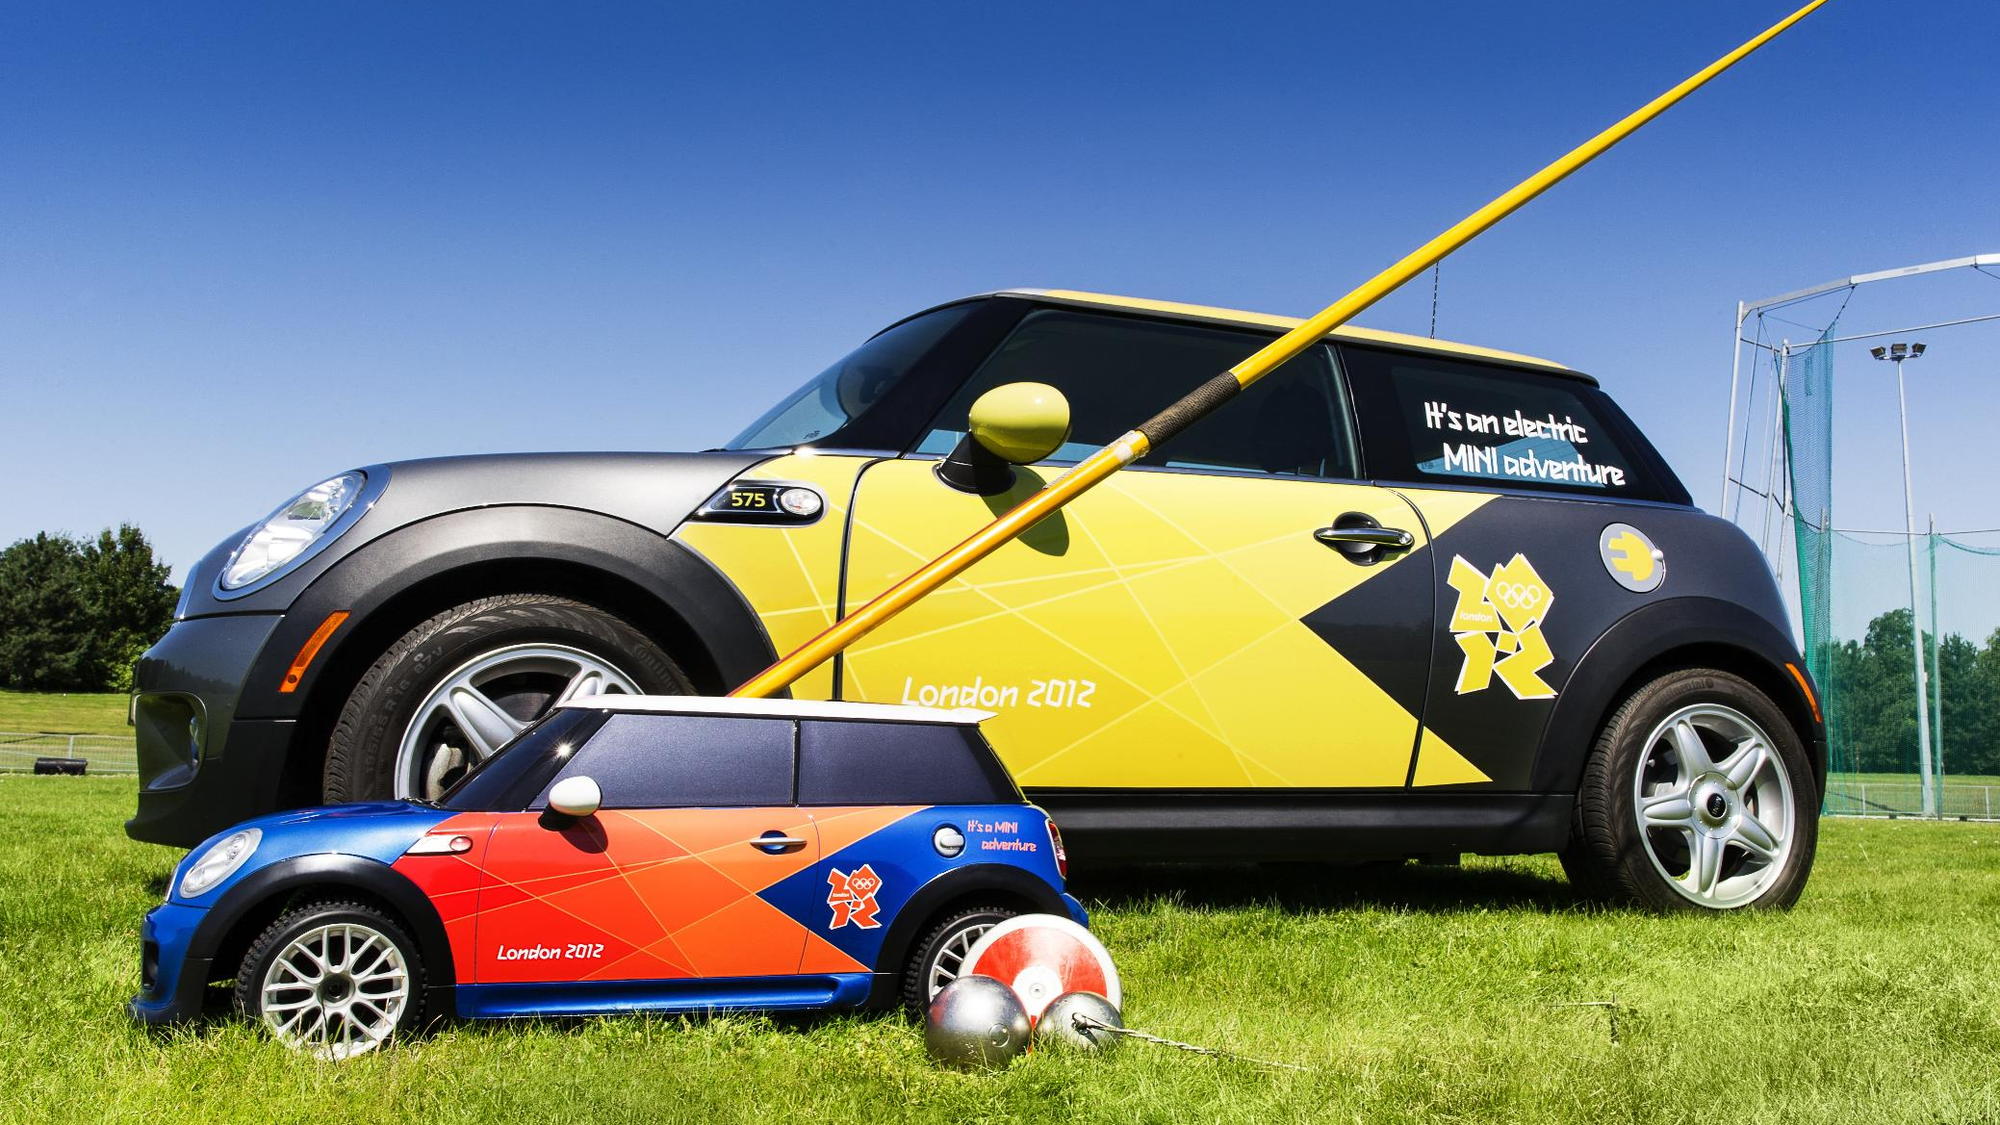 BMW's London 2012 Olympic remote control MINIs